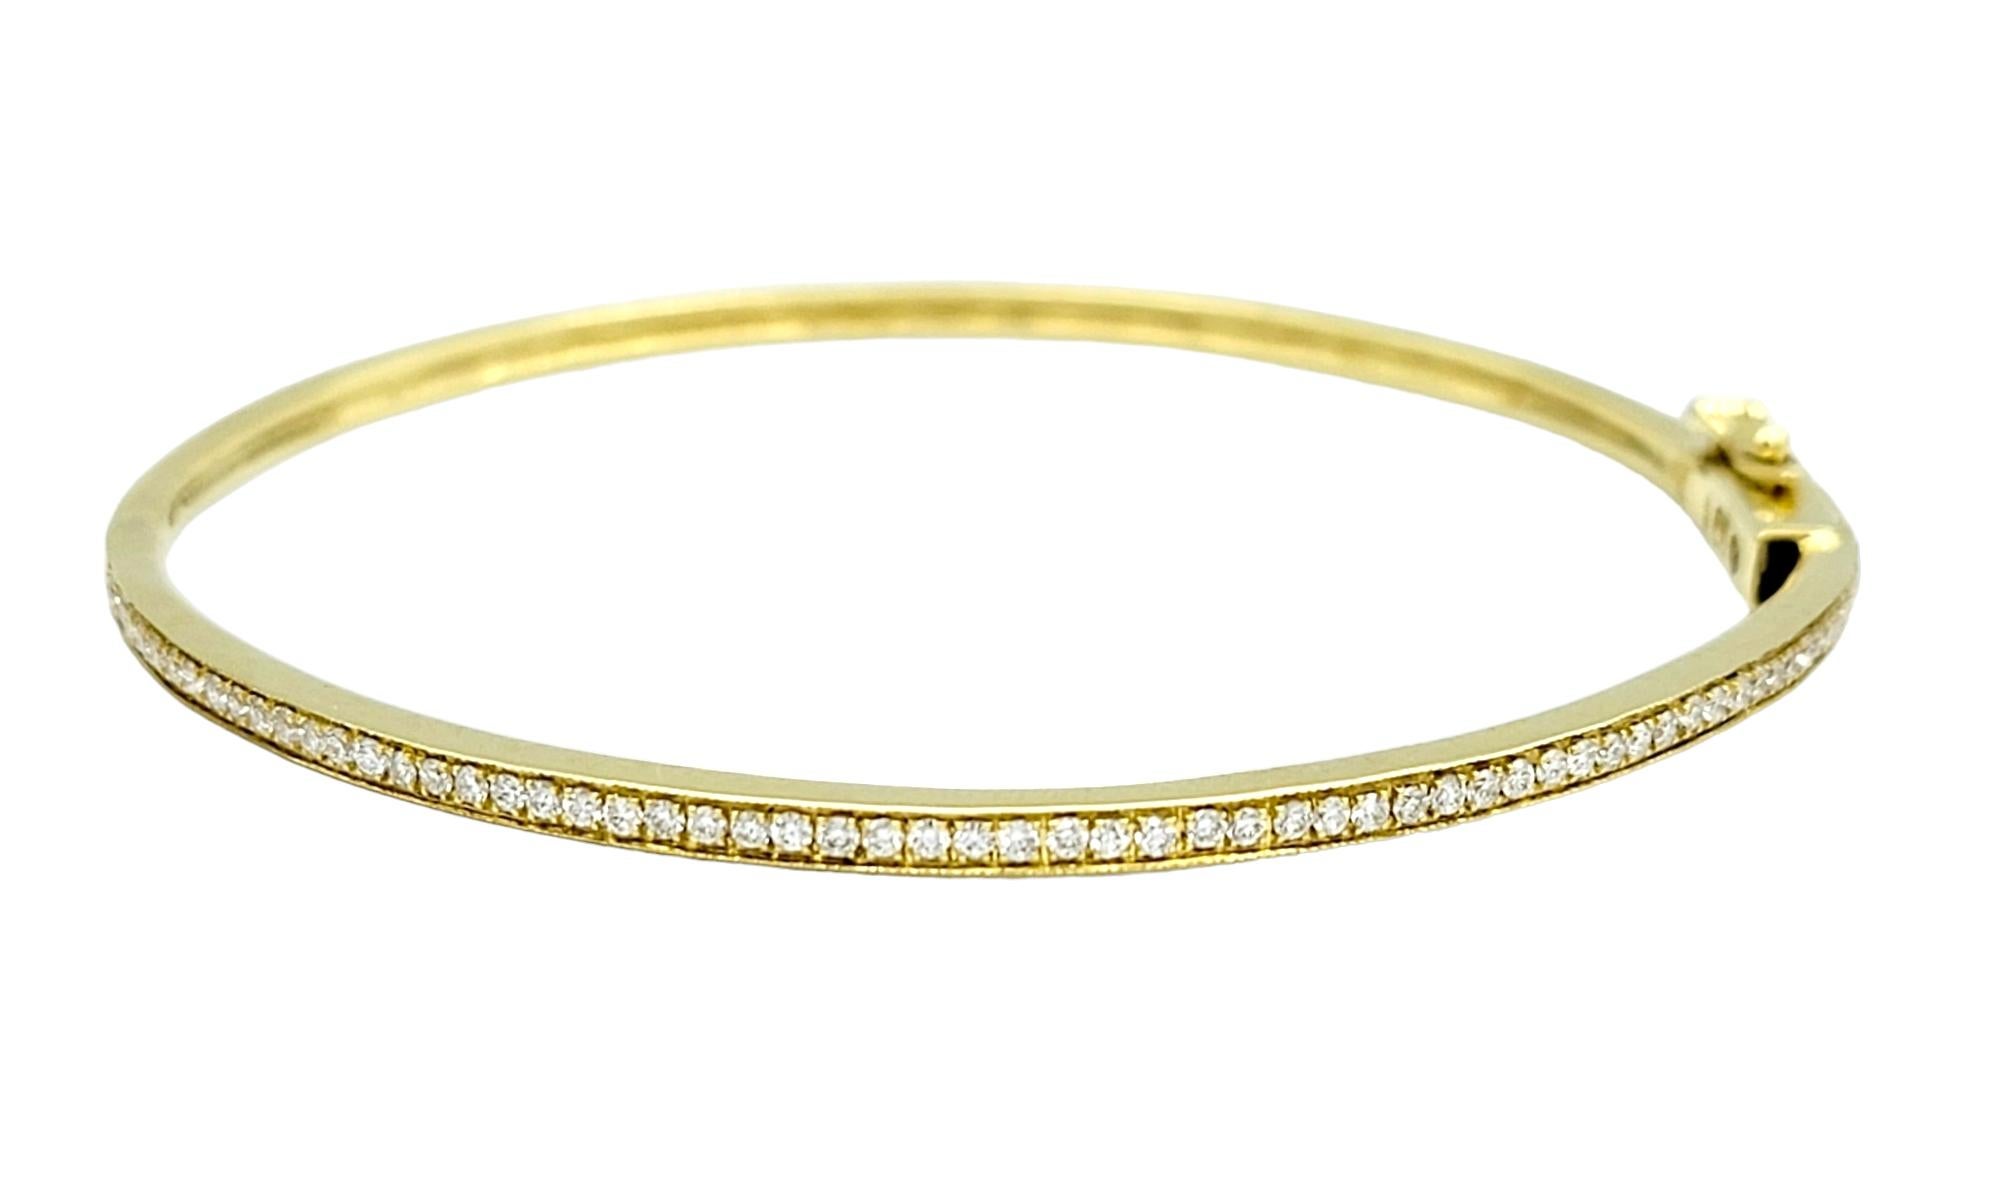 The inner circumference of this bracelet measures 6.38 inches and will comfortably fit a 5.75 - 6.25 inch wrist.

This striking 18 karat yellow gold bangle bracelet is a beautiful fusion of classic elegance and modern luxury. This bangle displays a